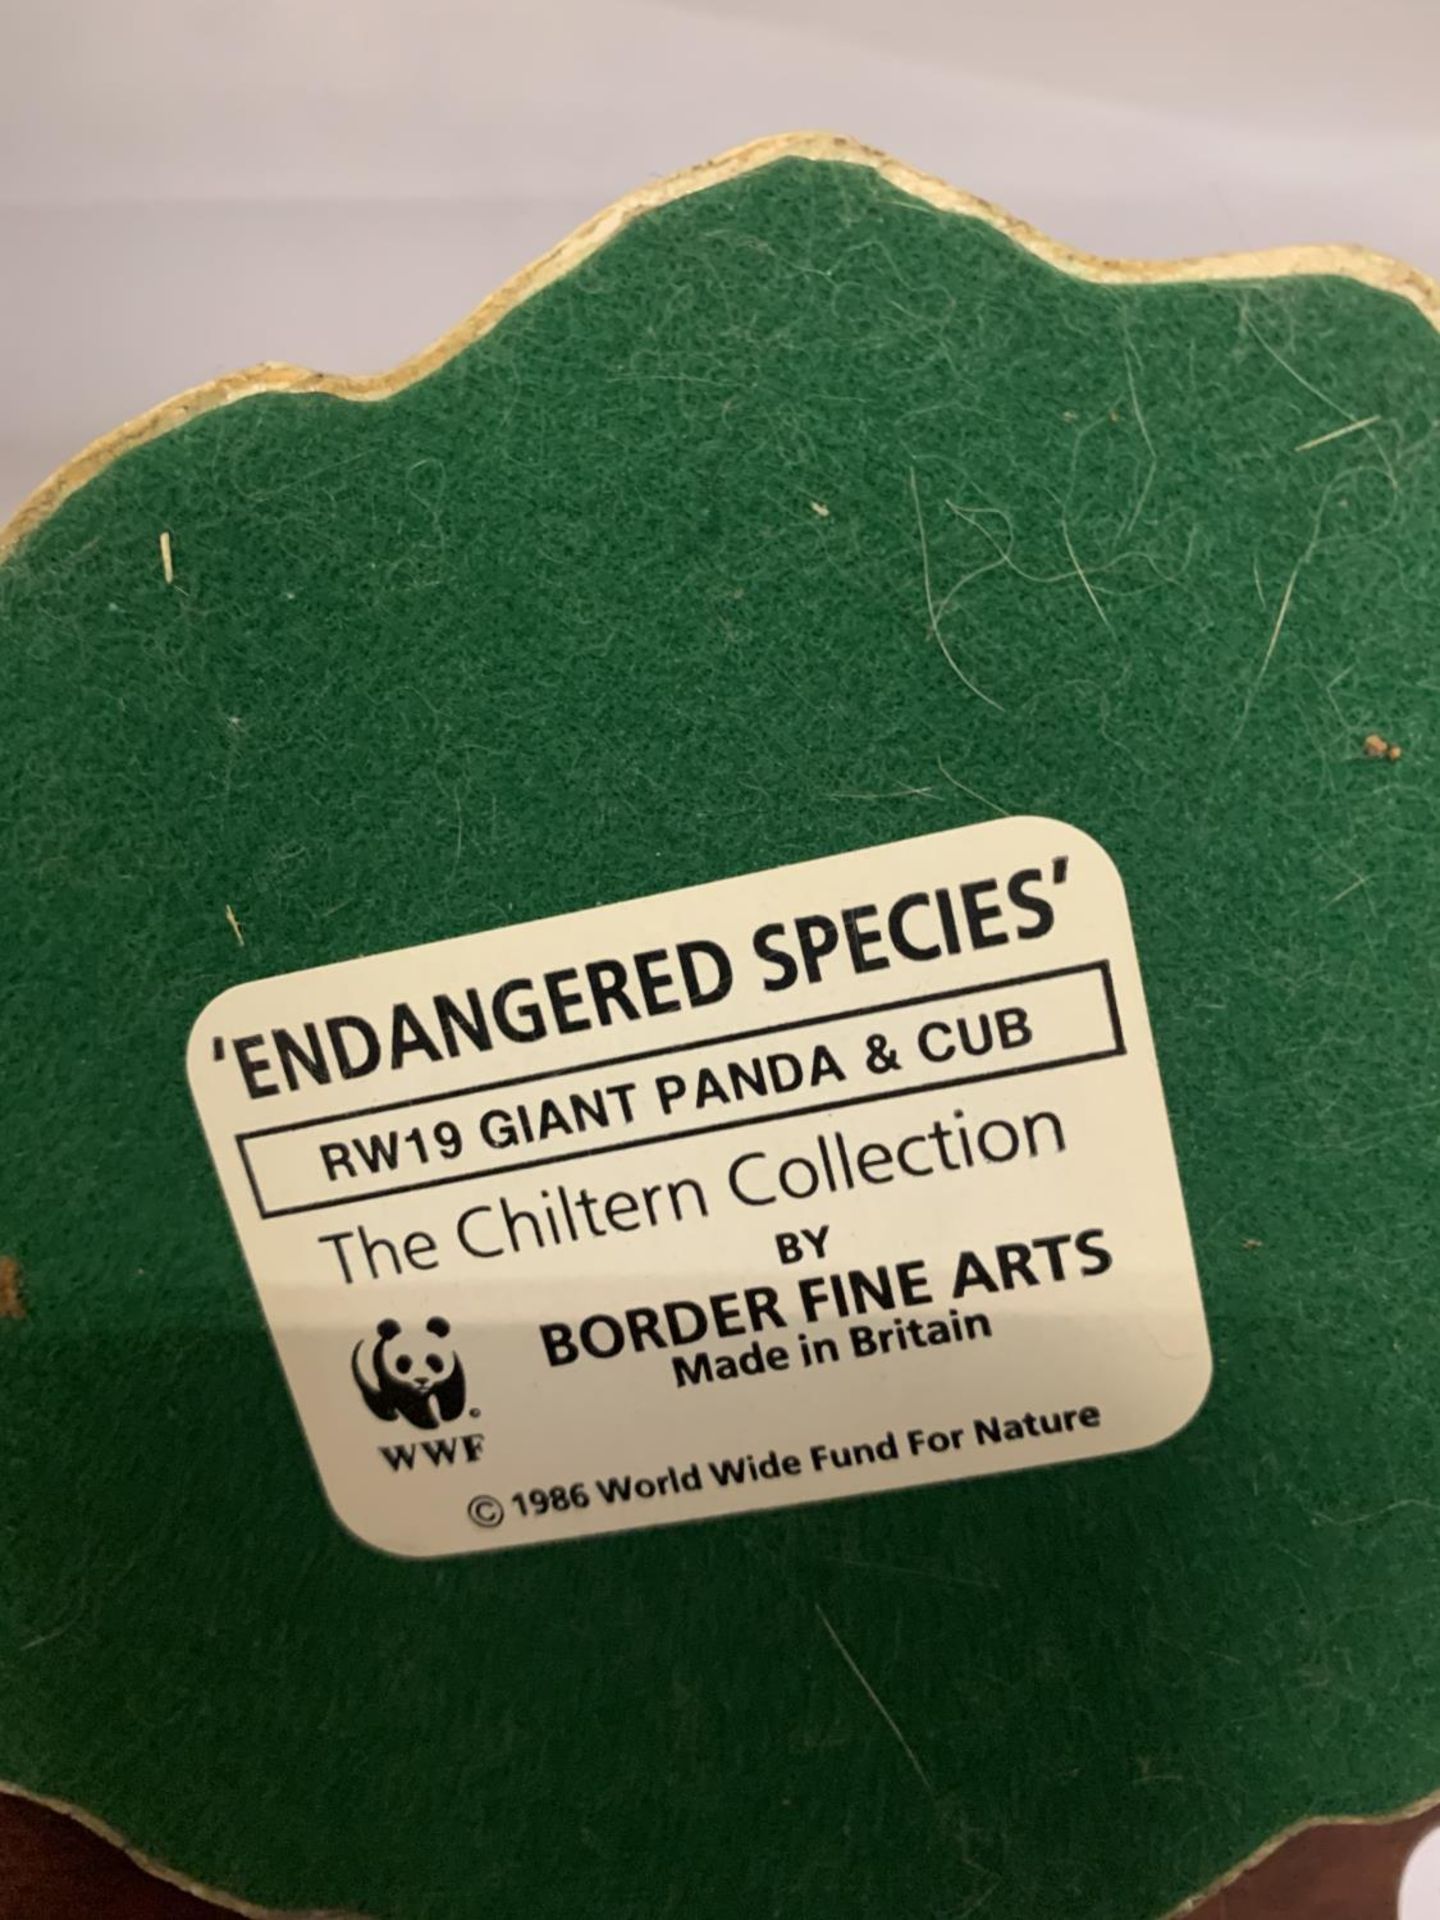 A BORDER FINE ARTS THE CHILTERN COLLECTION 'ENDANGERED SPECIES' RW19 GIANT PANDA AND CUB - Image 2 of 2